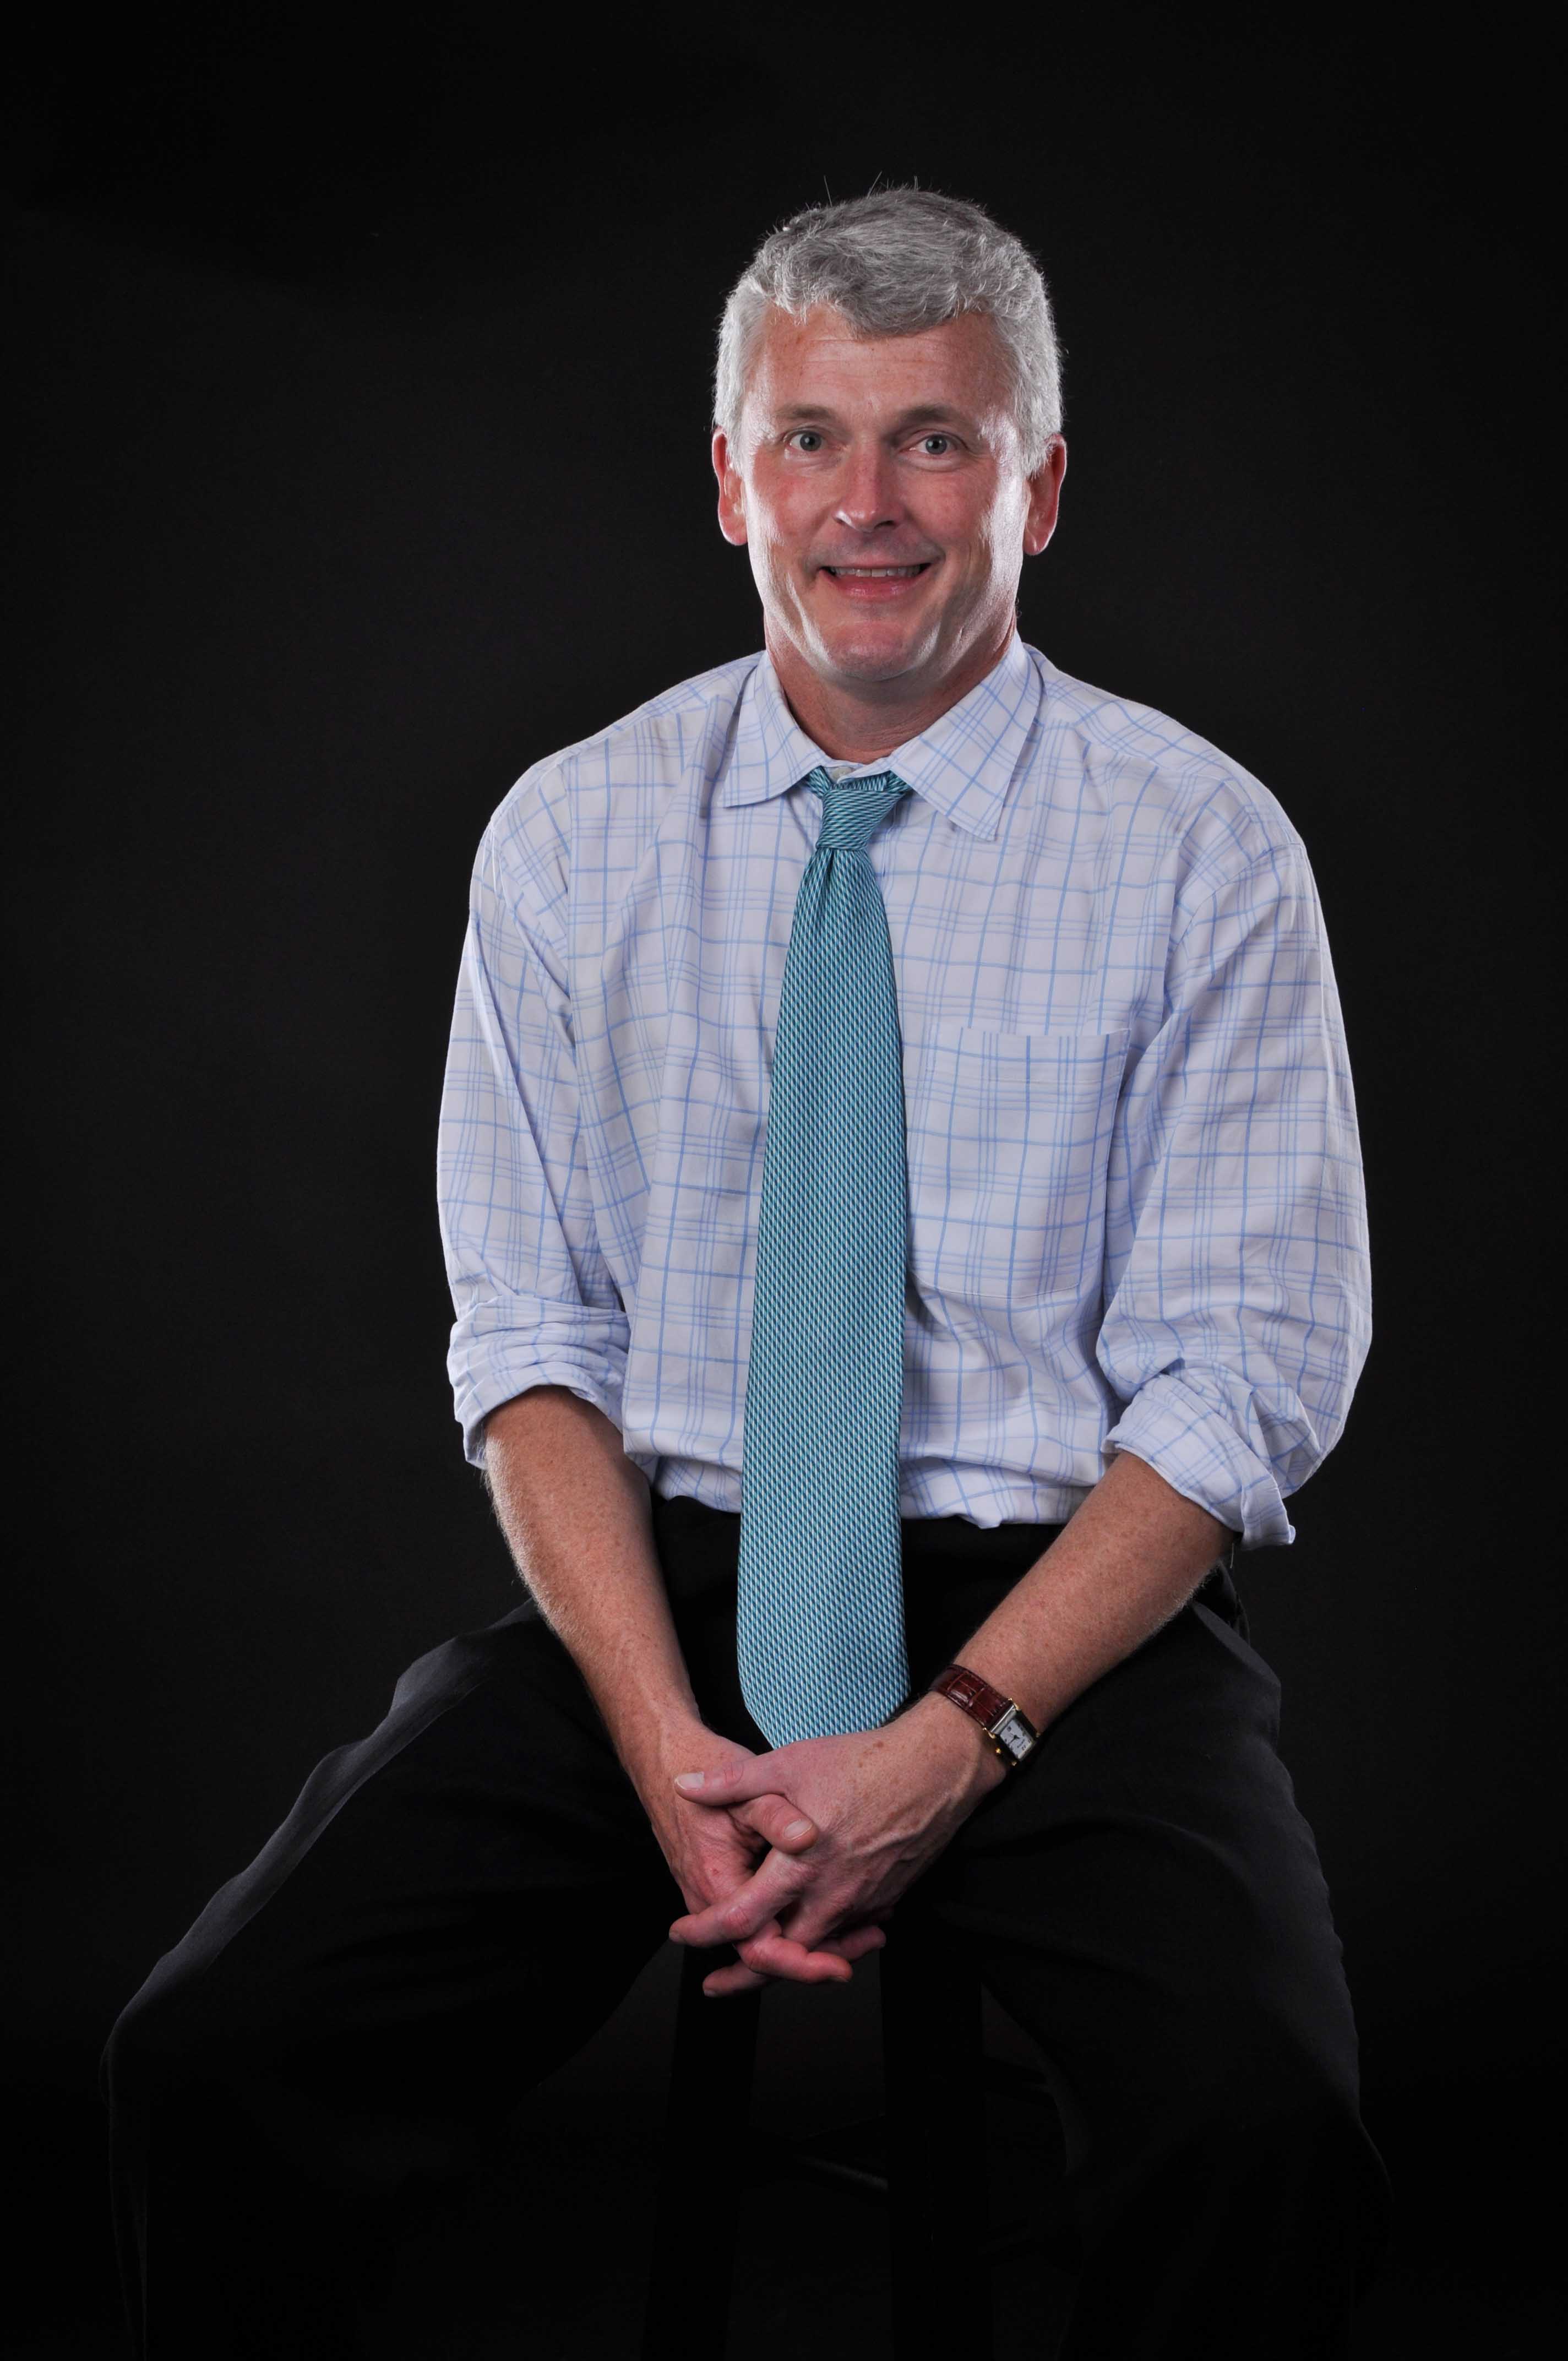 Dave Landers - Partner of STAR Physical Therapy